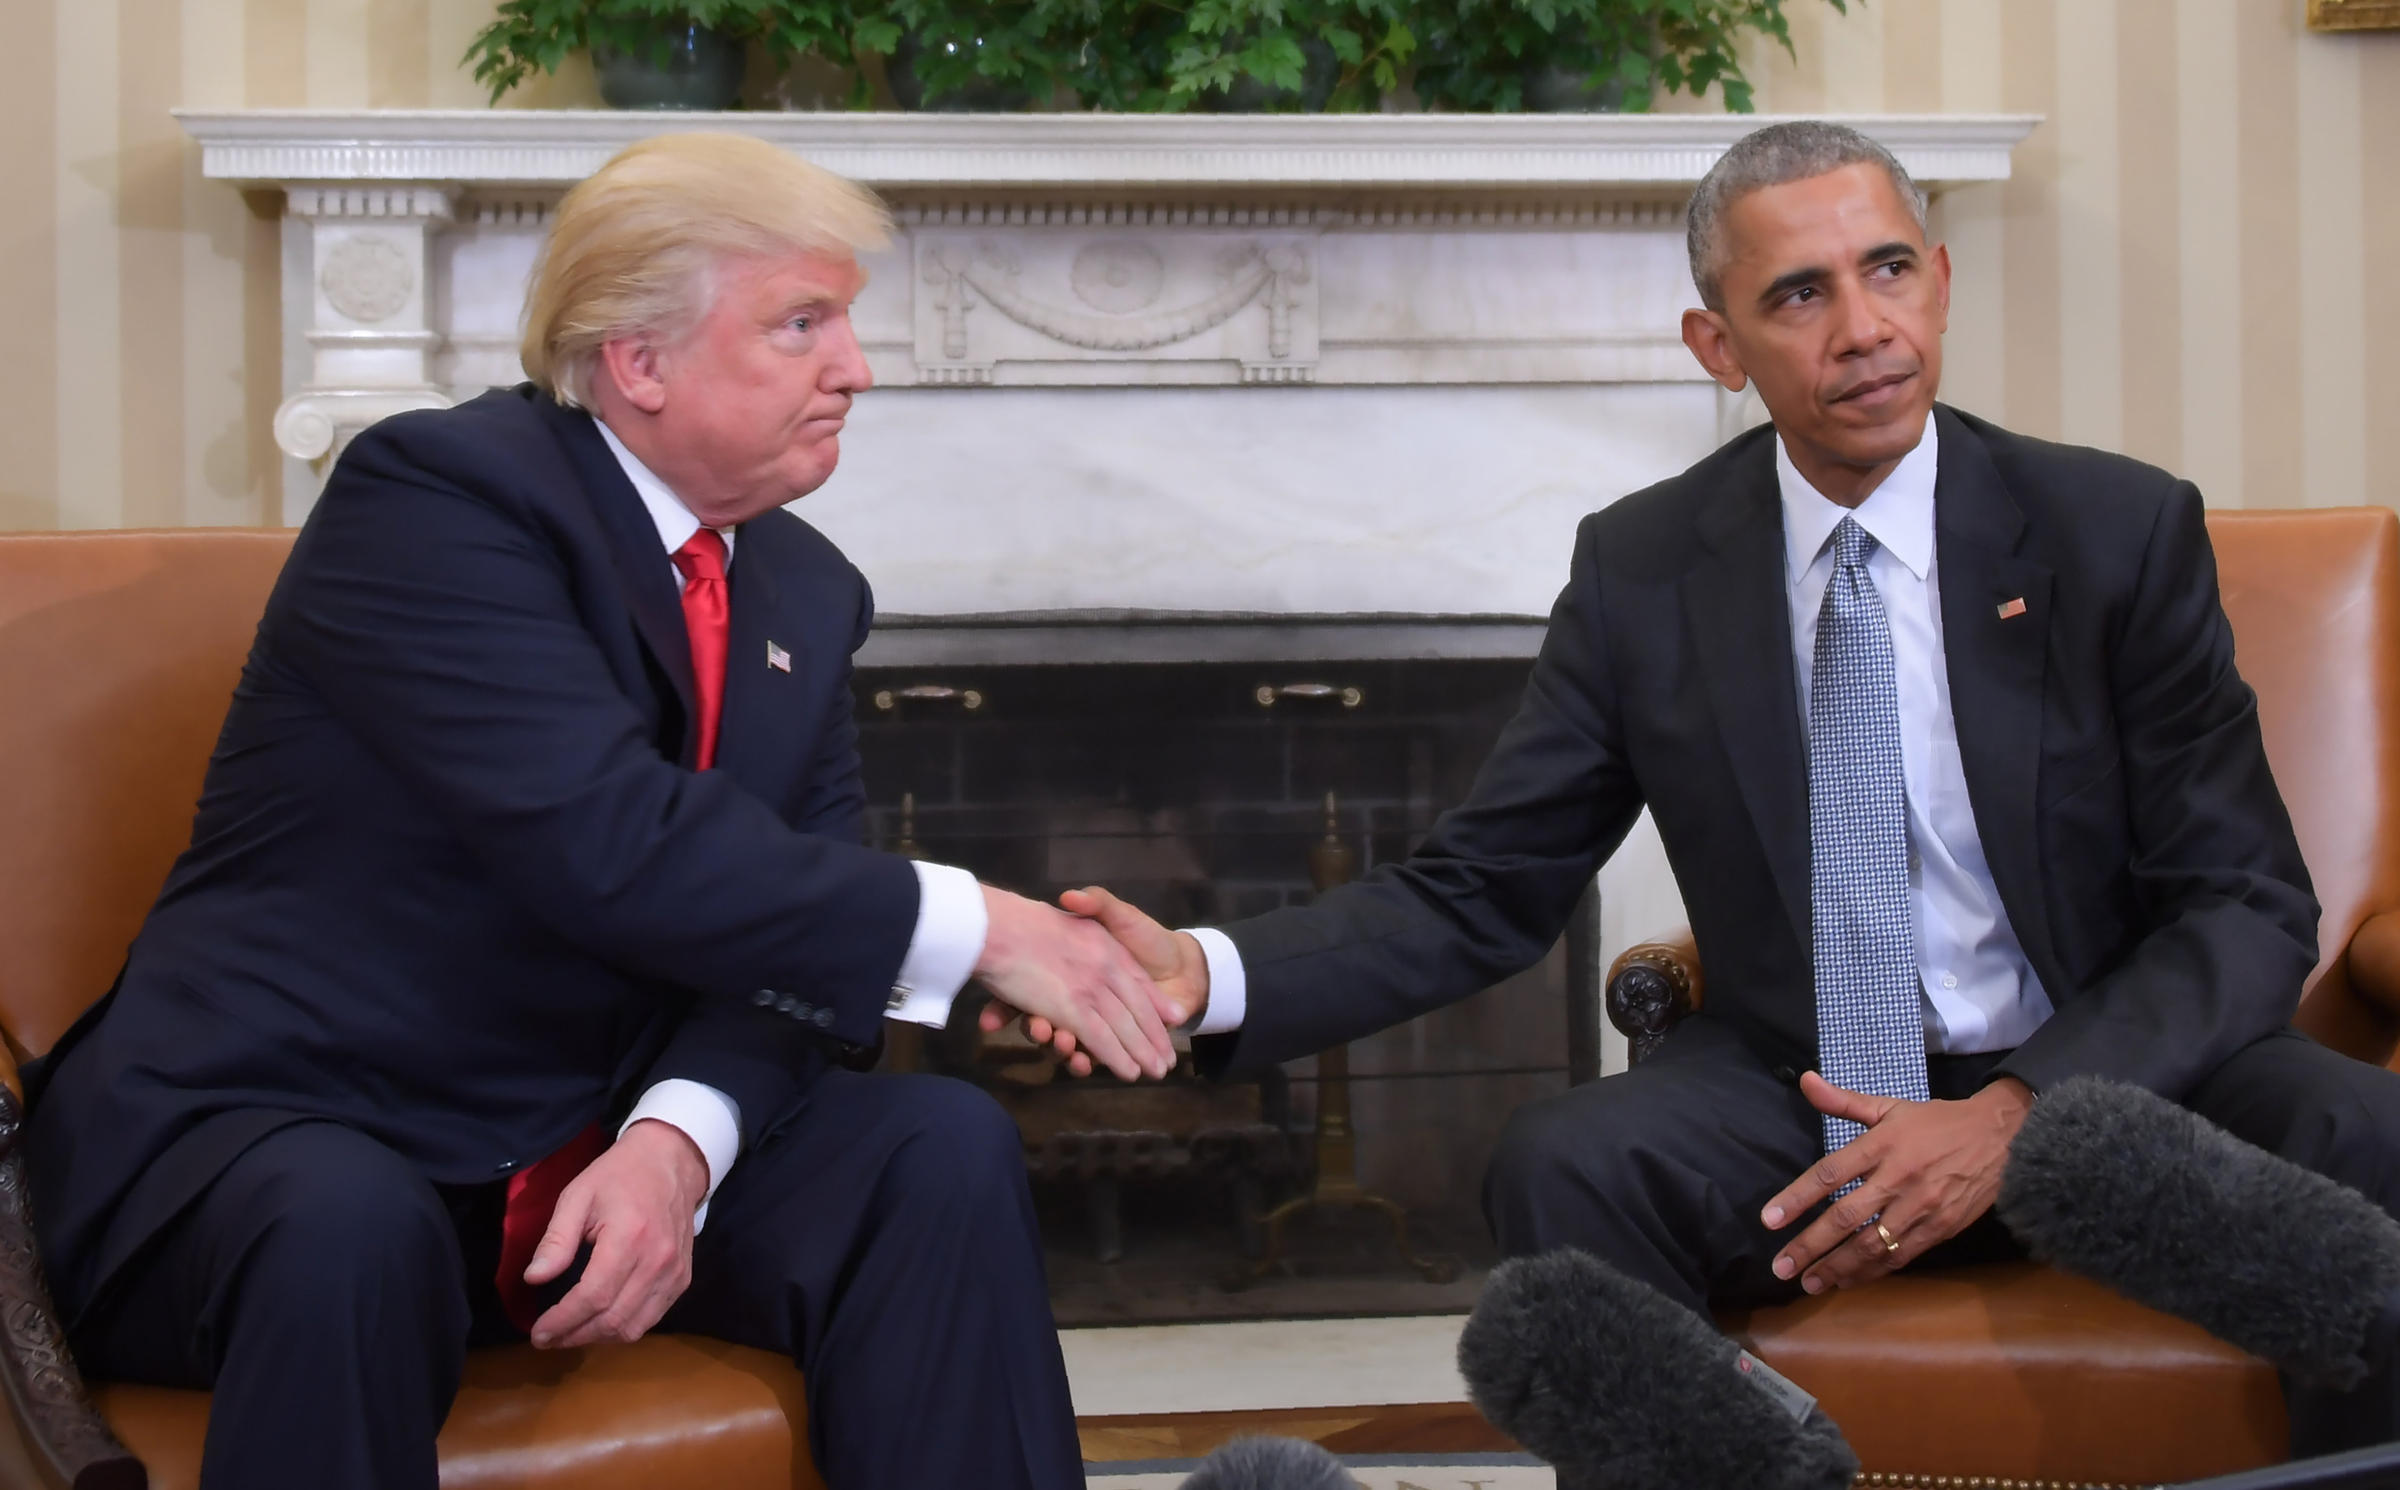 Trump Wants A Fight With Obama. Here's Why He Might 'Be Careful' What He Wishes For | WUWM